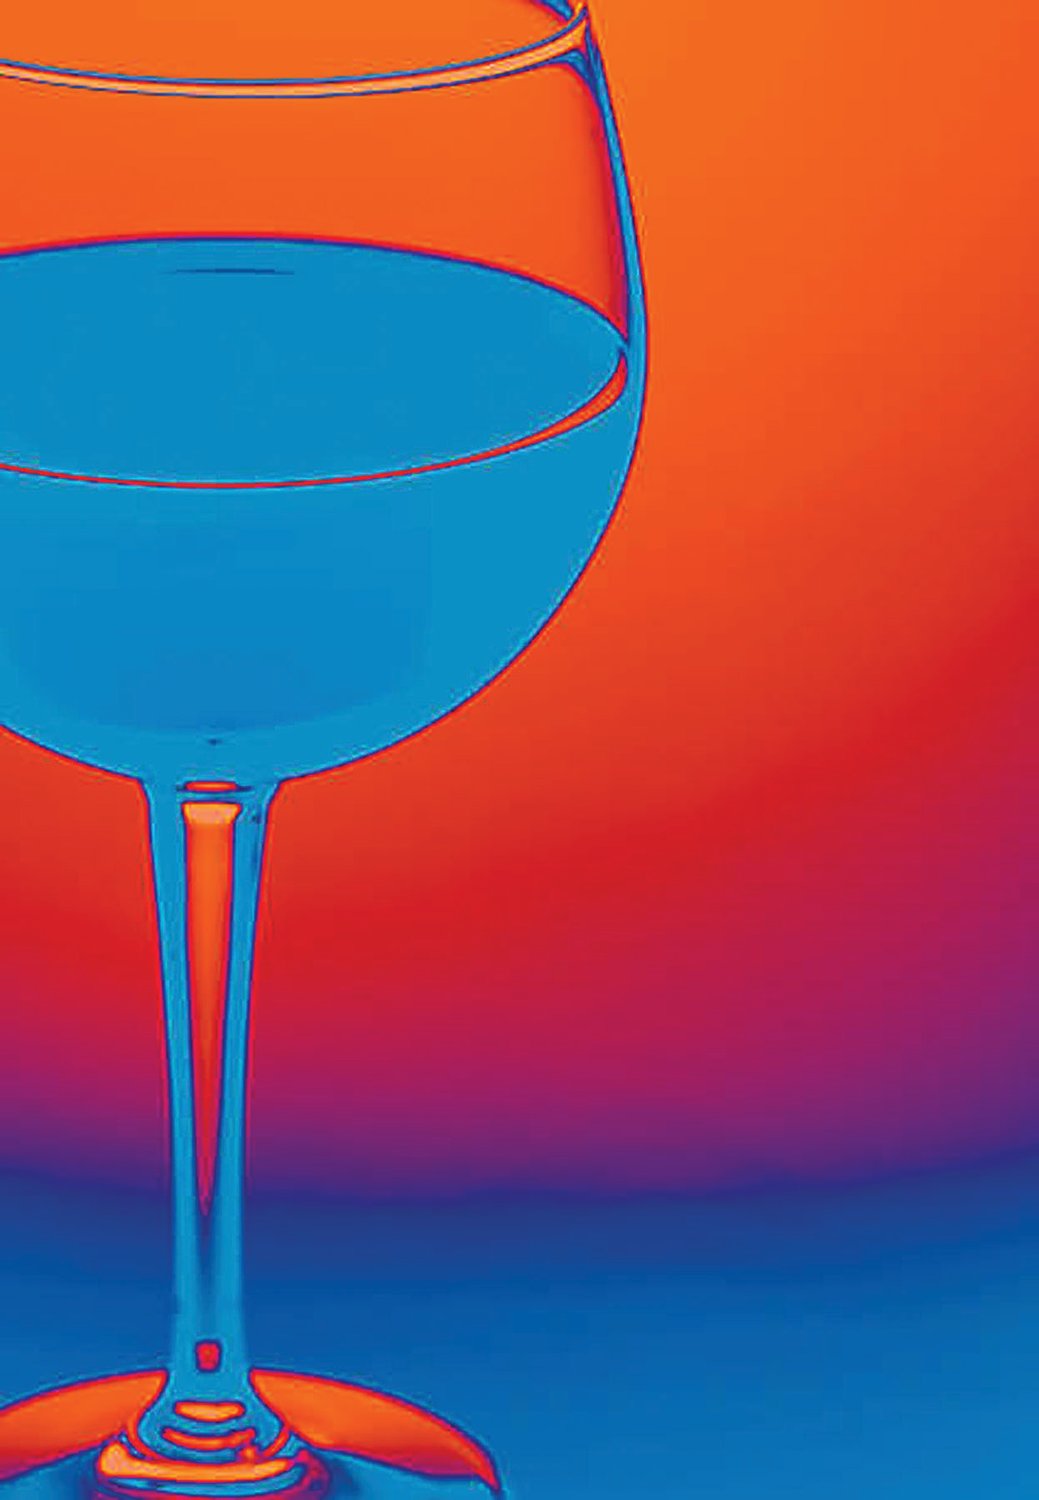 Artistic wine glass: Colorful abstract art